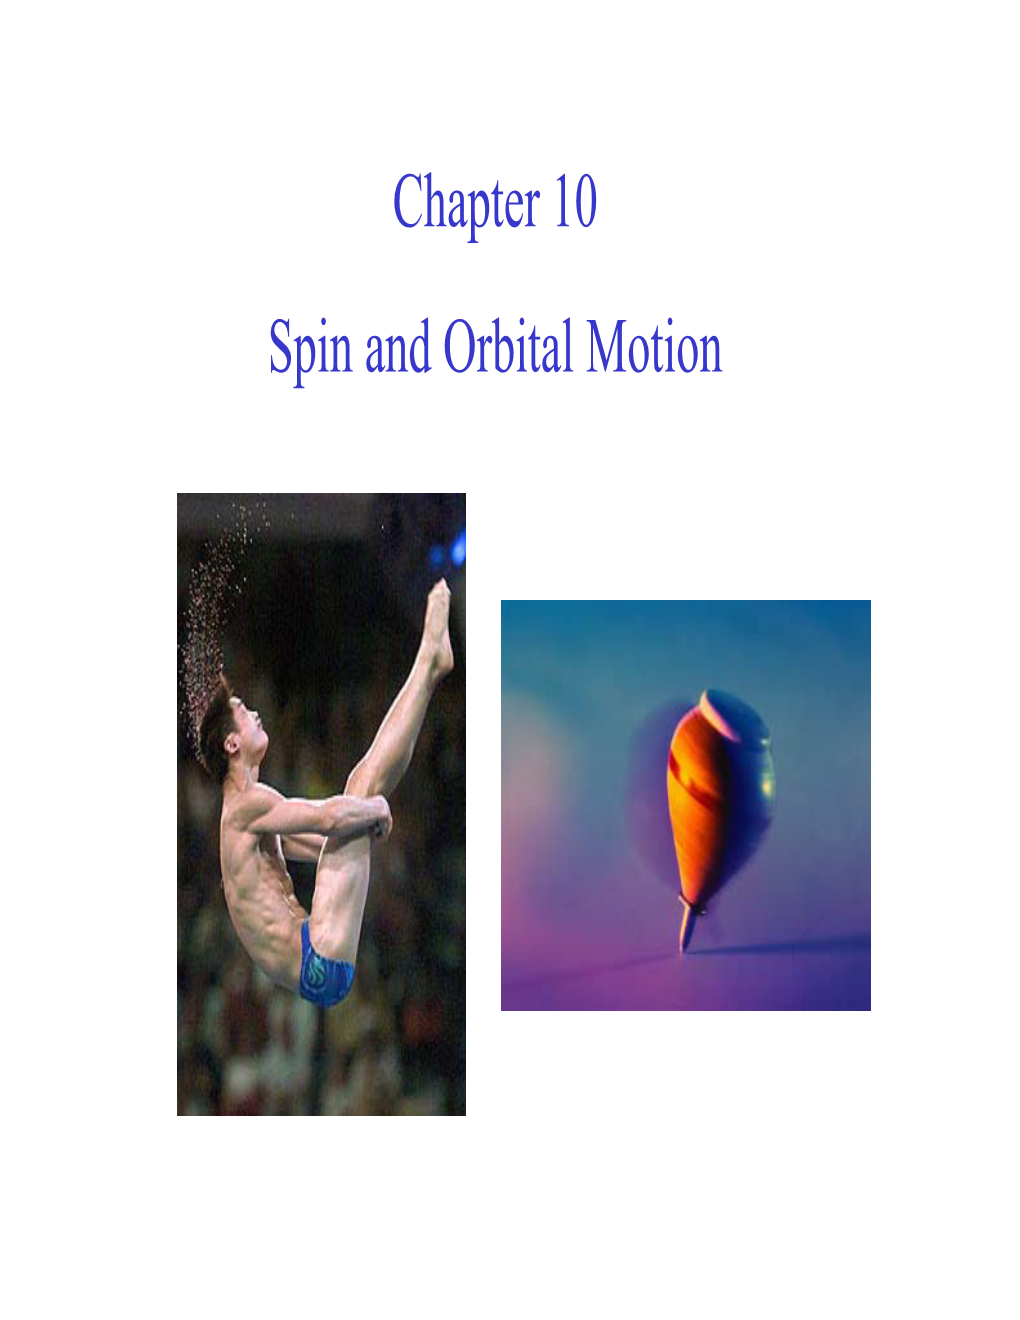 Chapter 10 Spin and Orbital Motion Some Definitions Orbital Motion: Motion Relative to a Point, Often Periodic, but Not Necessarily So